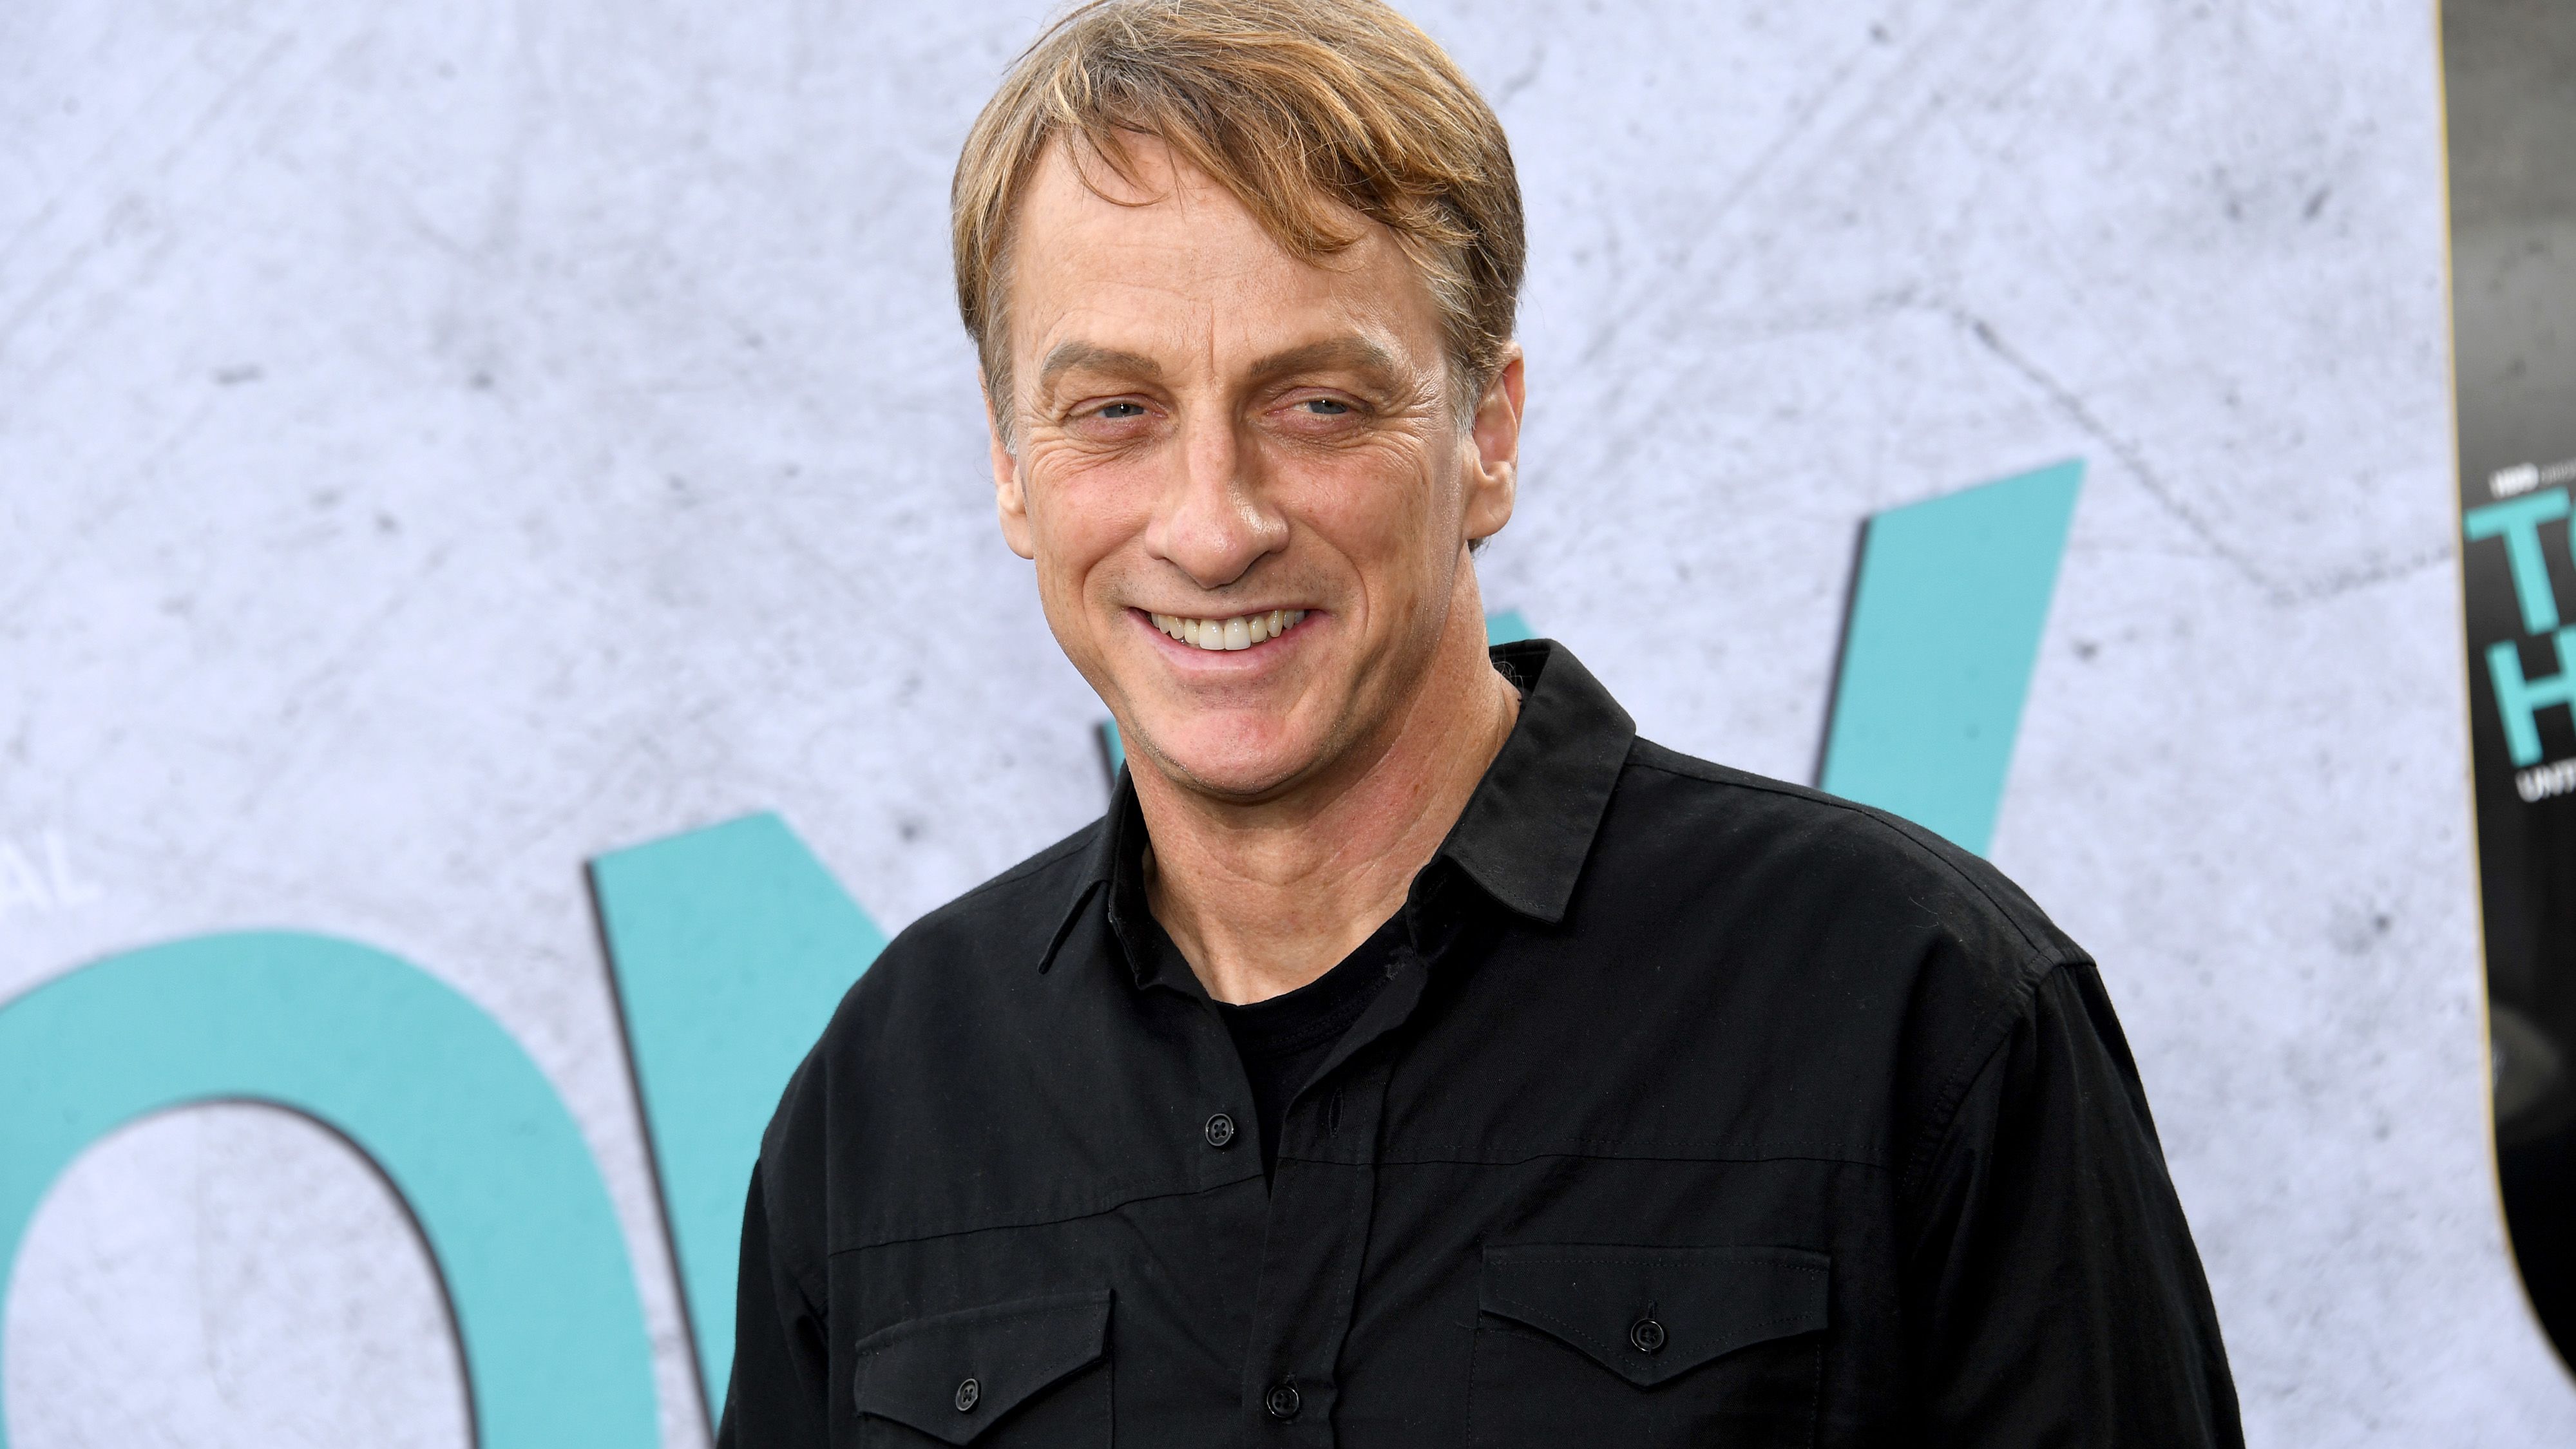 SANTA MONICA, CALIFORNIA - MARCH 30: Tony Hawk attends the Los Angeles premiere of HBO Max's "Tony Hawk: Until the Wheels Fall Off" at The Bungalow on March 30, 2022 in Santa Monica, California. (Photo by Jon Kopaloff/Getty Images)